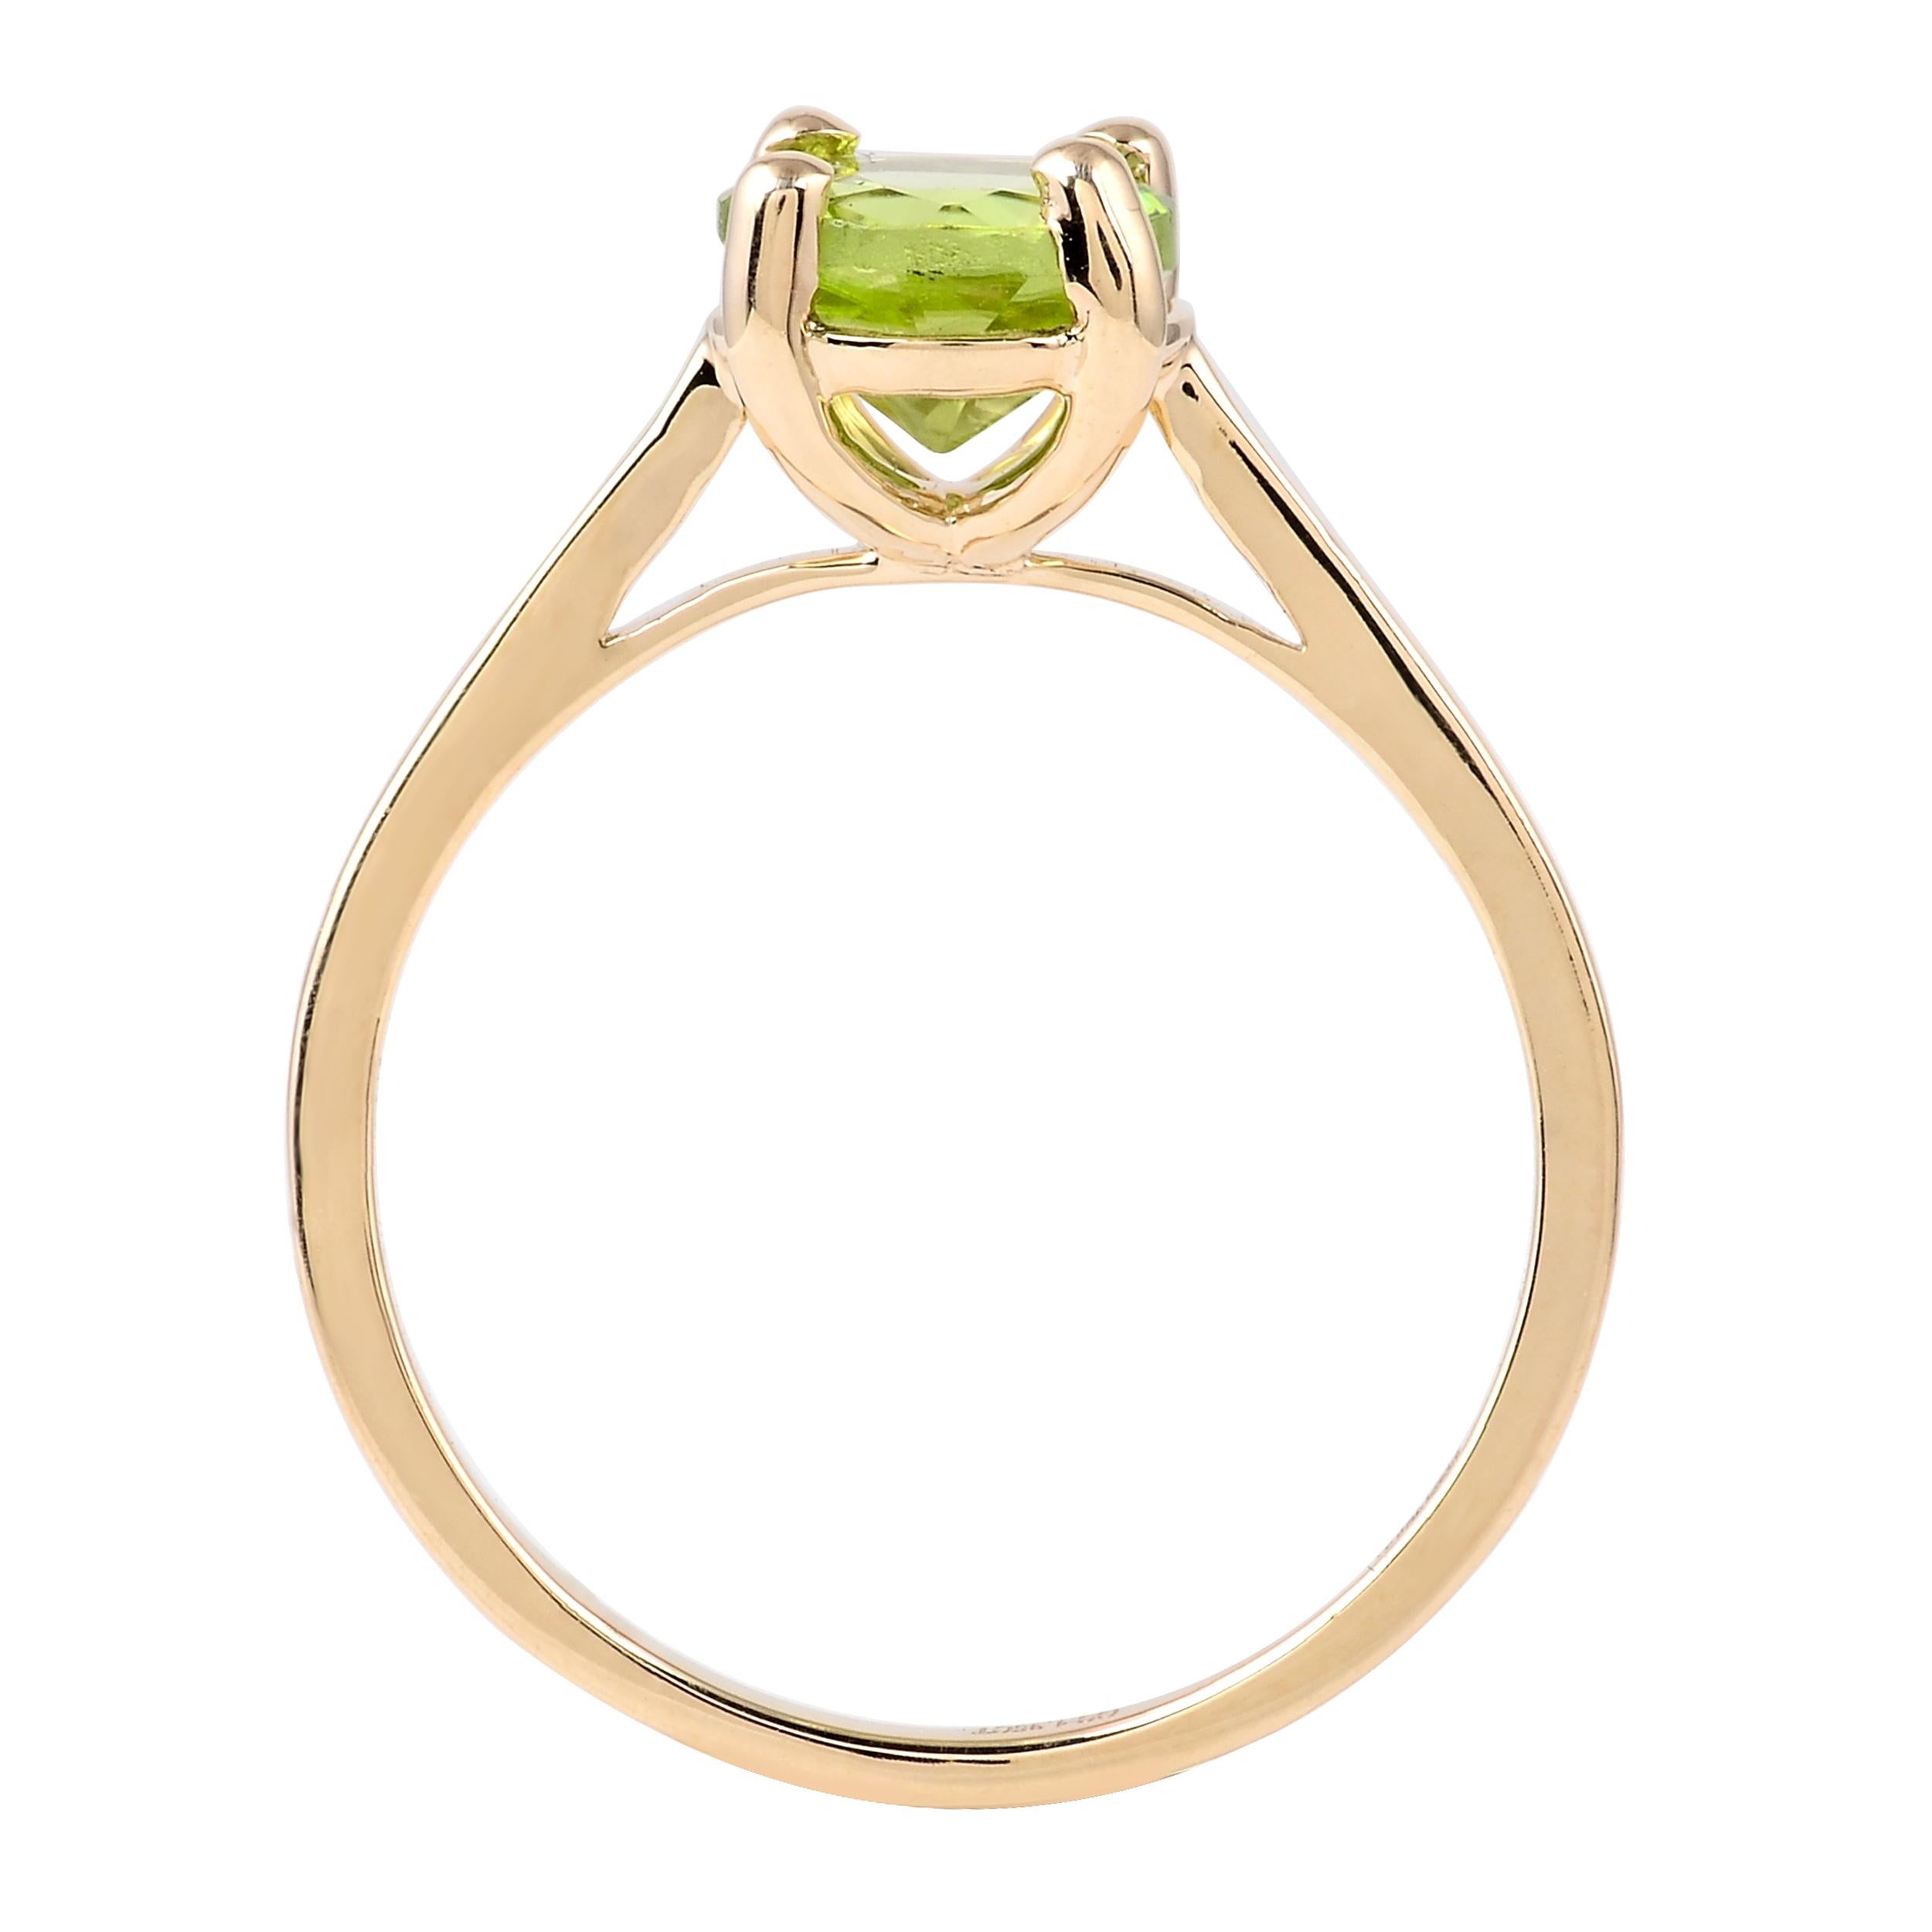 Chic 14K 1.09ct Peridot Solitaire Cocktail Ring, Size 7 - Statement Jewelry For Sale 1